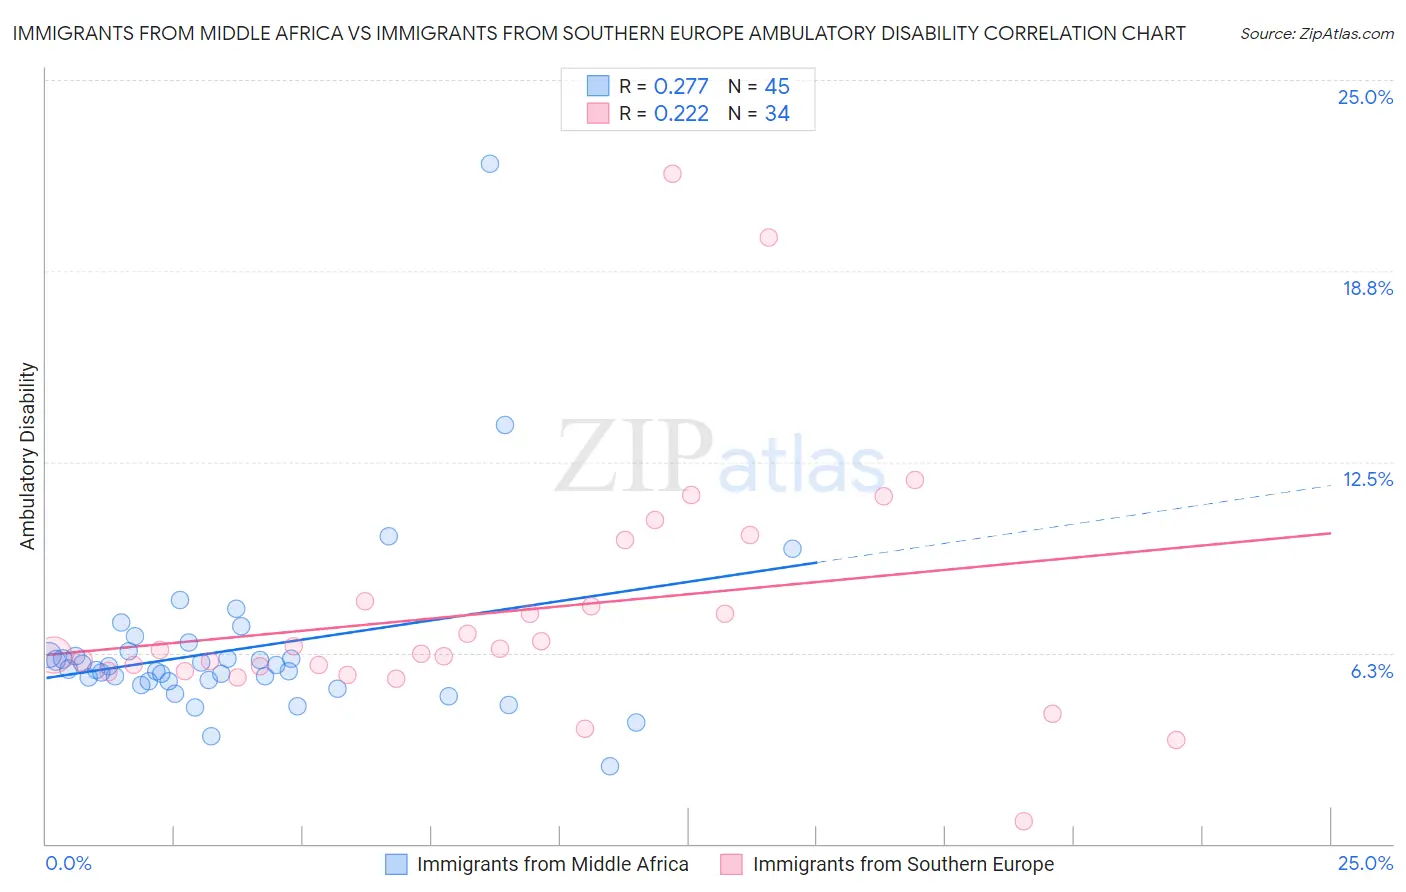 Immigrants from Middle Africa vs Immigrants from Southern Europe Ambulatory Disability